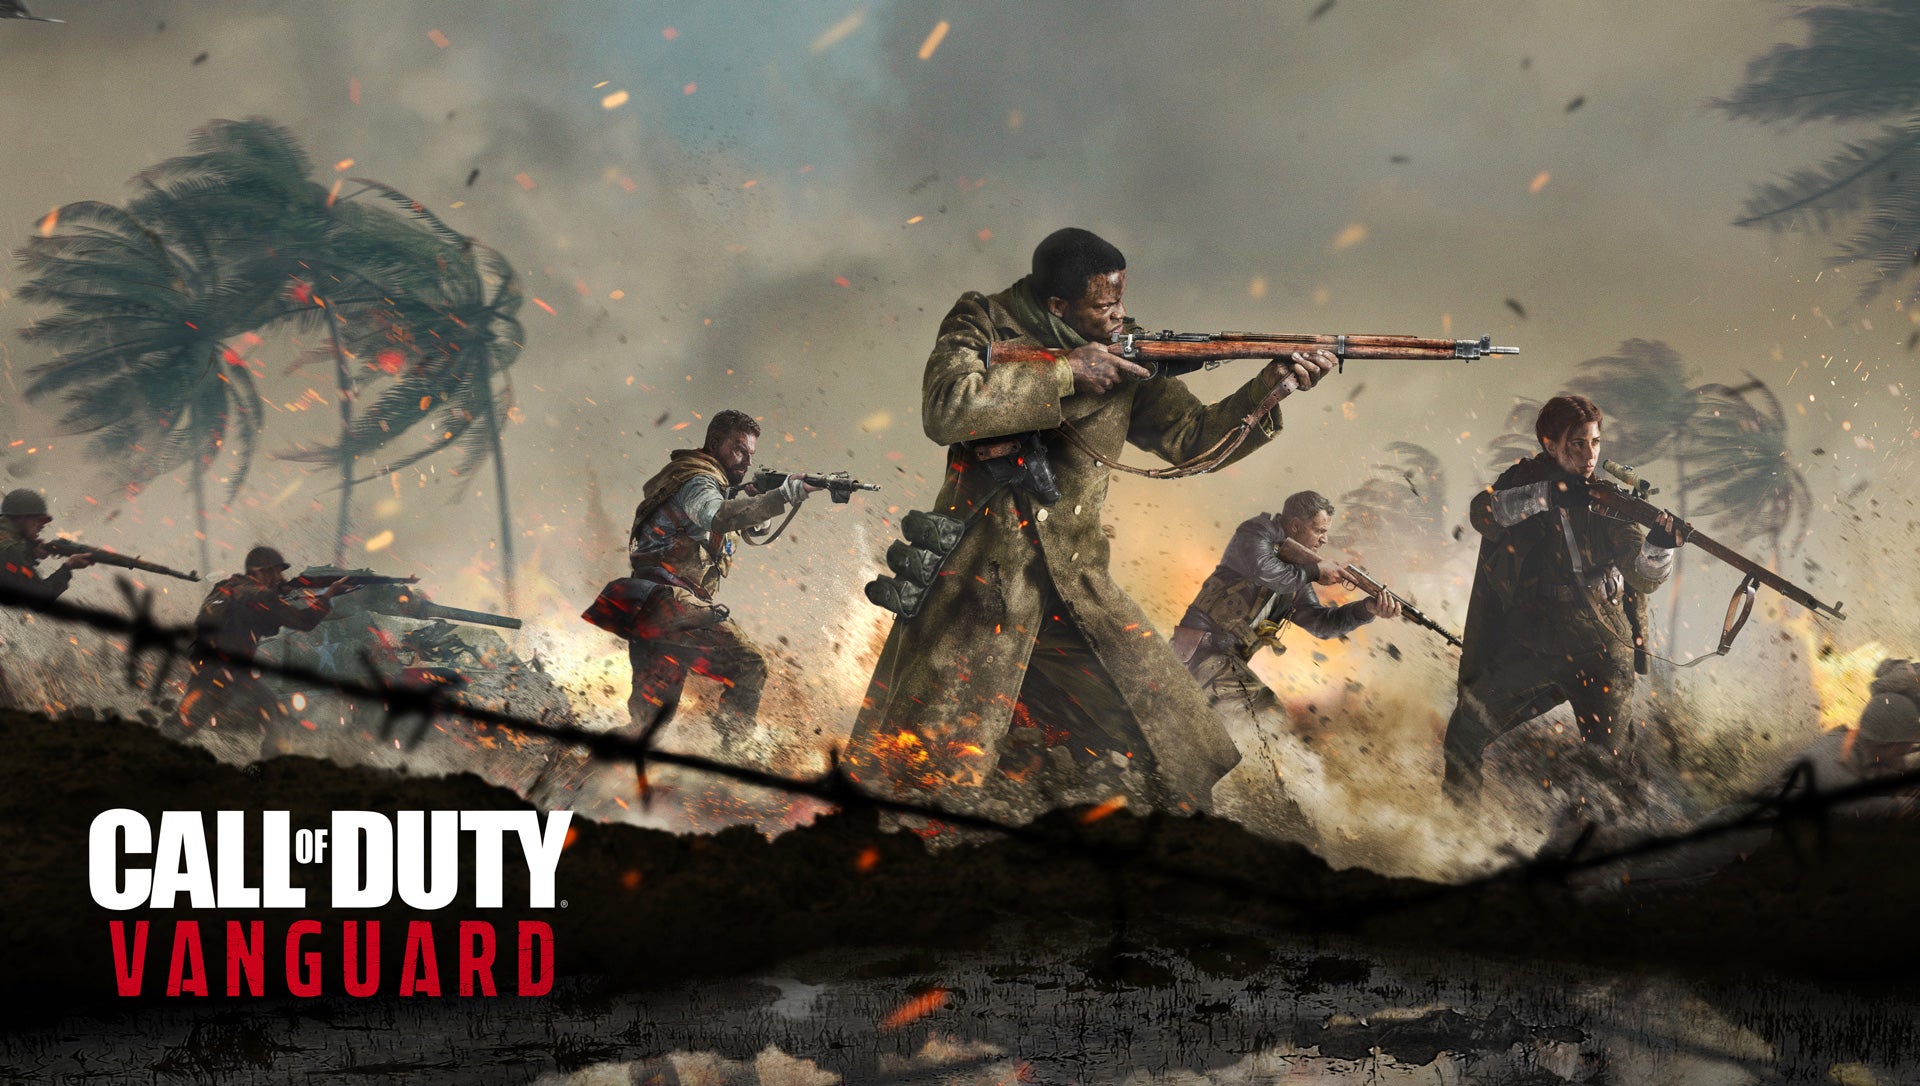 Image for Call of Duty: Vanguard reveal event in Warzone will award players free loot